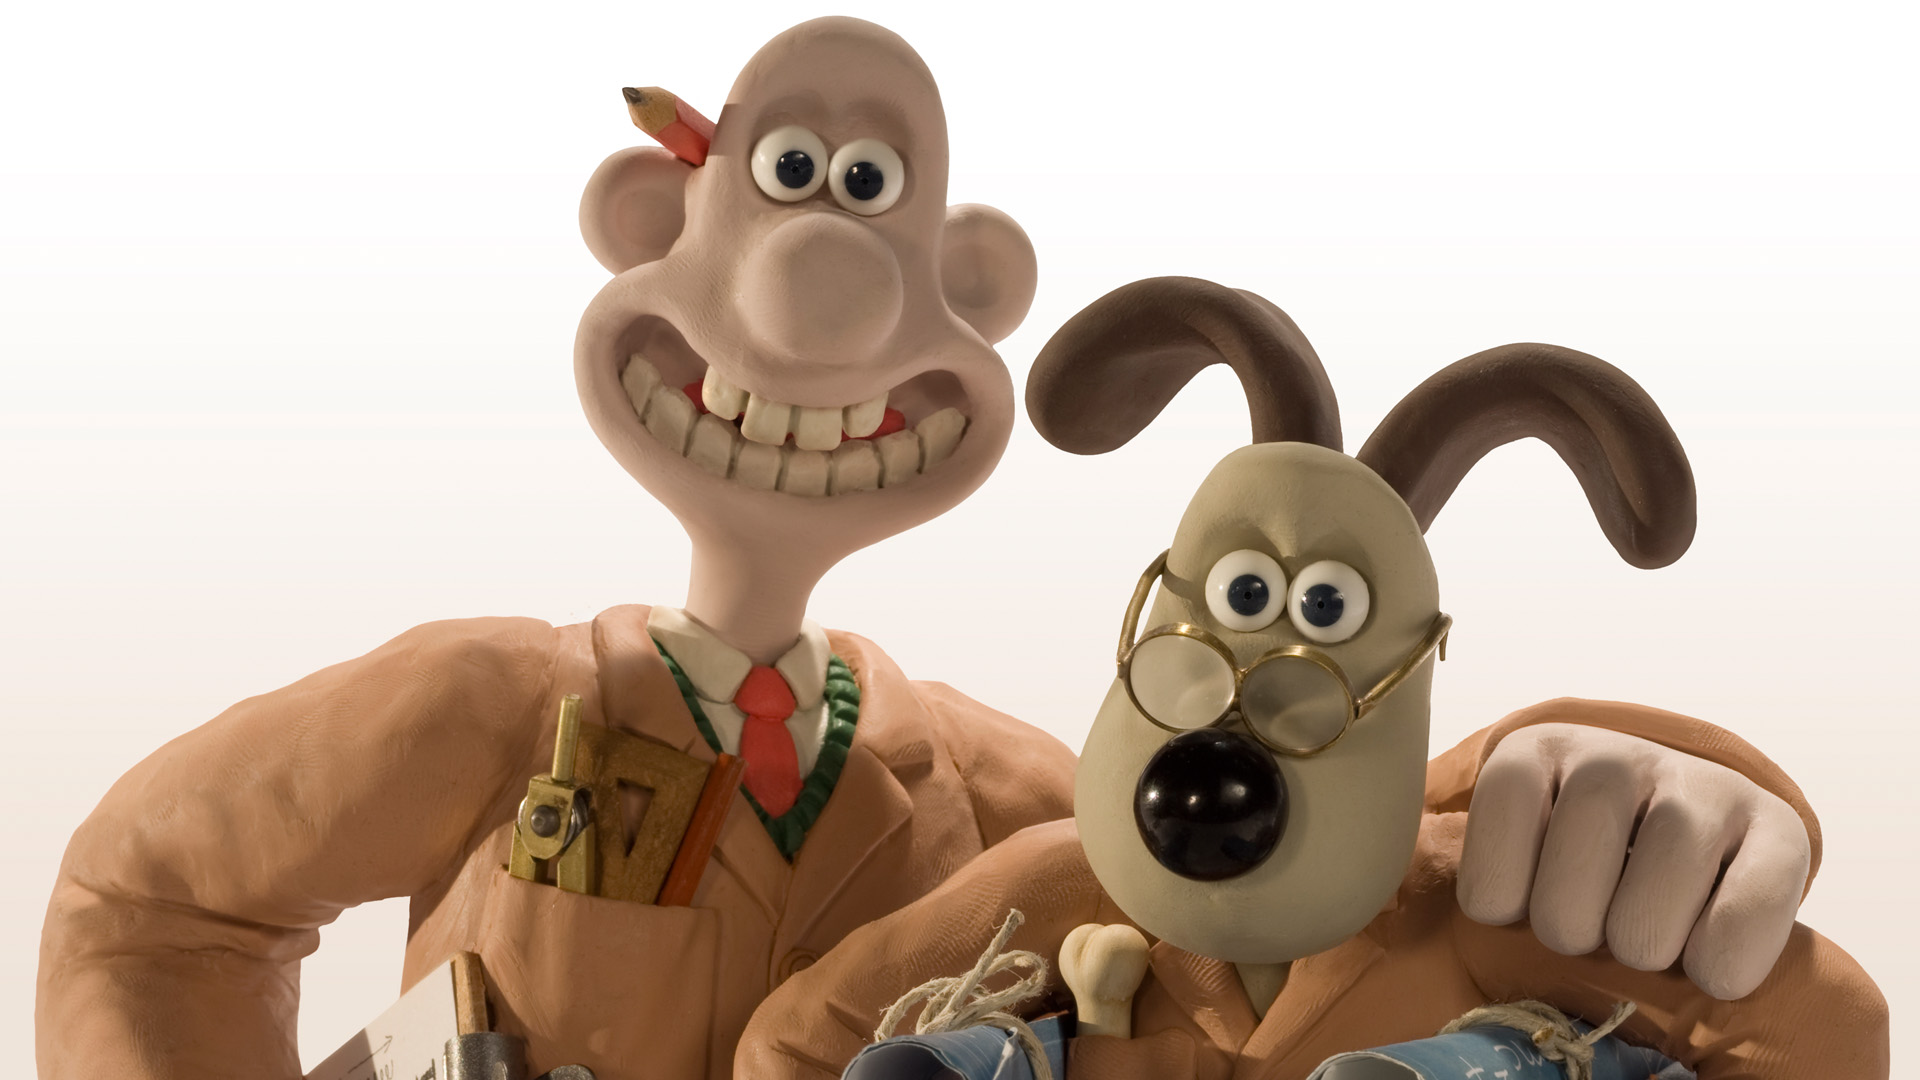 wallace & gromit, tv show